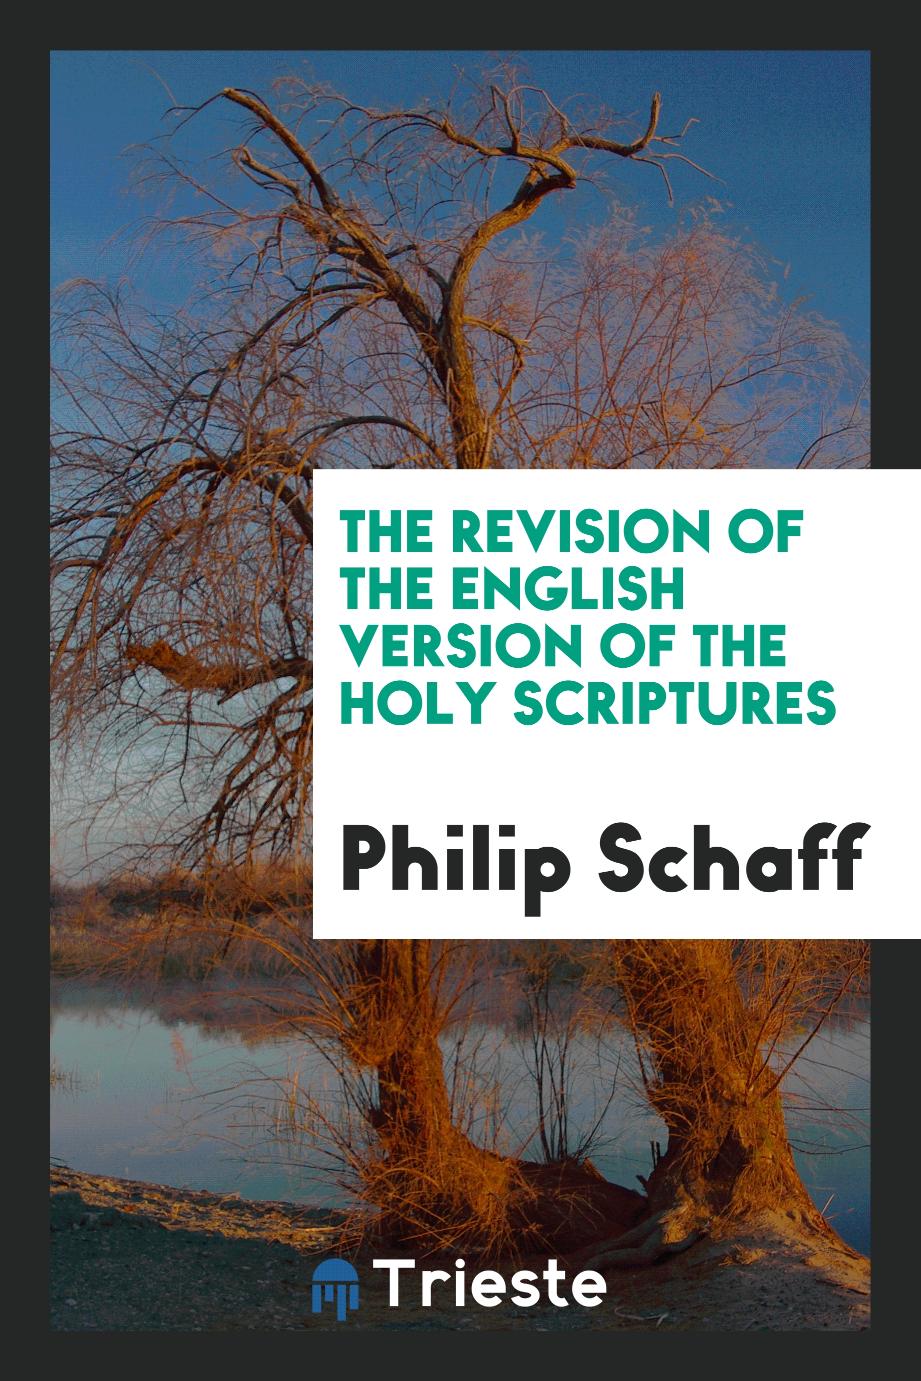 The revision of the English version of the Holy Scriptures